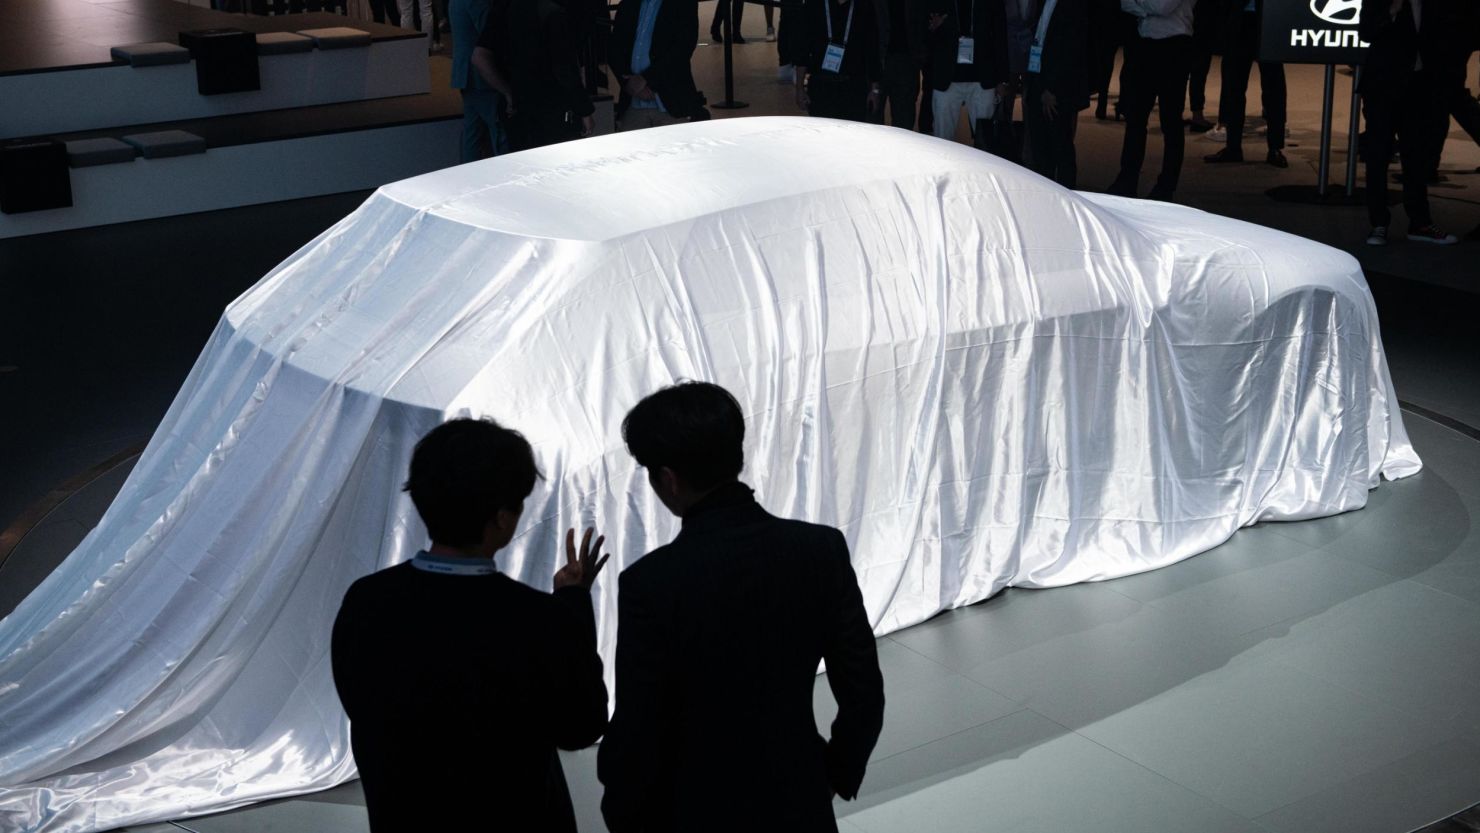 FRANKFURT AM MAIN, GERMANY - SEPTEMBER 10: Spectators wait for the unveiling of a Hyundai concept car at the Frankfurt Motor Show. (Photo by Thomas Lohnes/Getty Images for Hyundai)